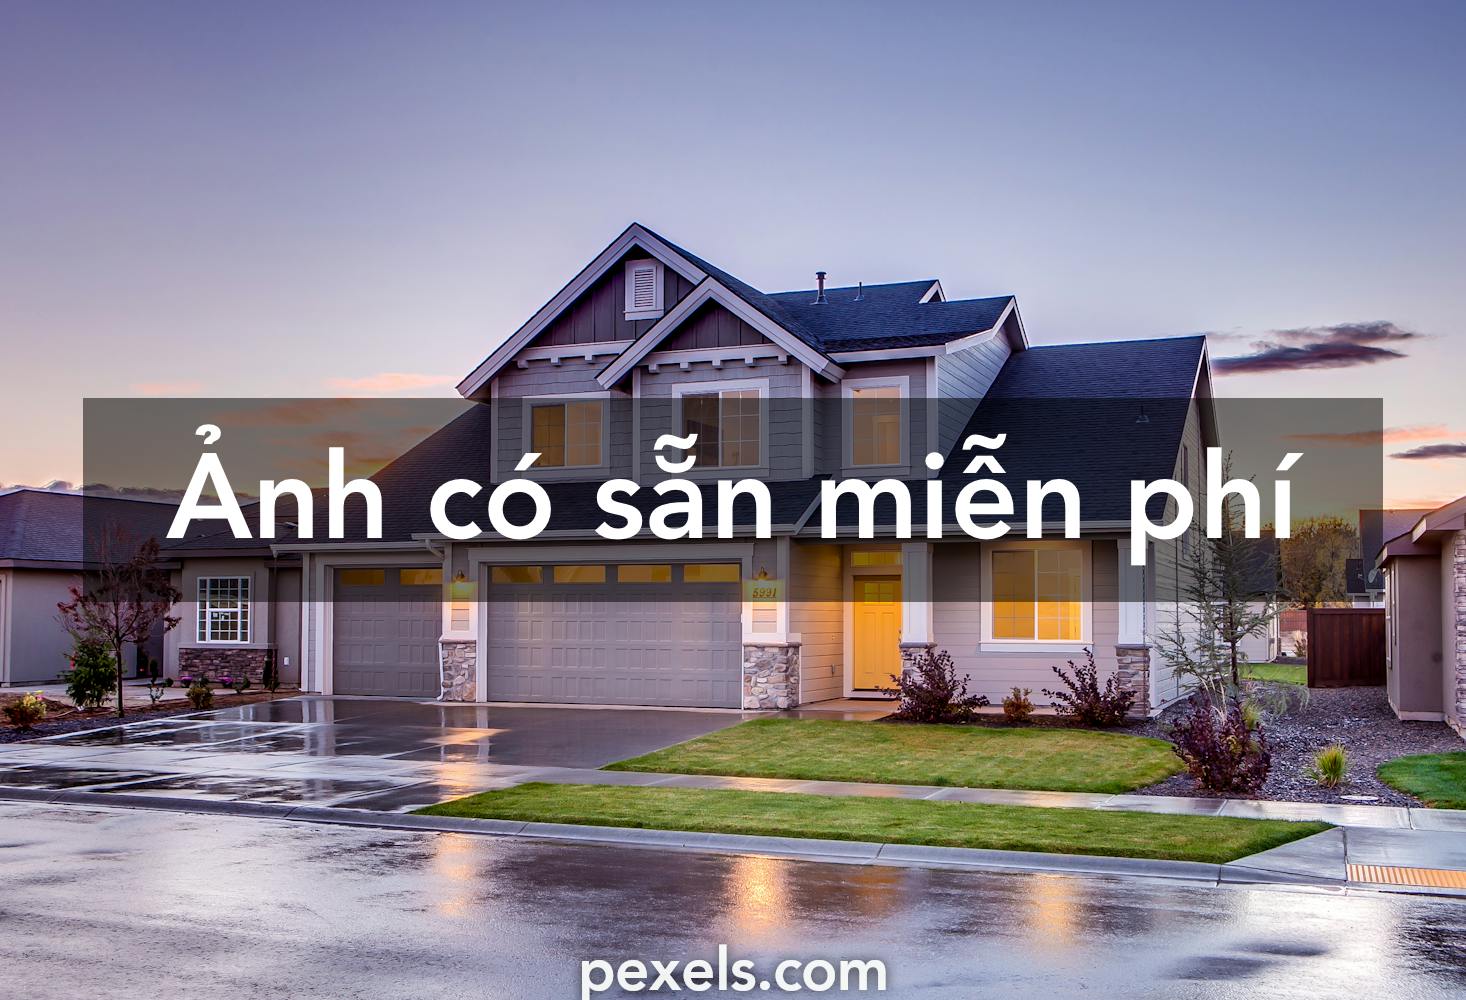 Hình nhà đất đẹp: Google search results show various options for downloading high-quality images of beautiful houses and lands.